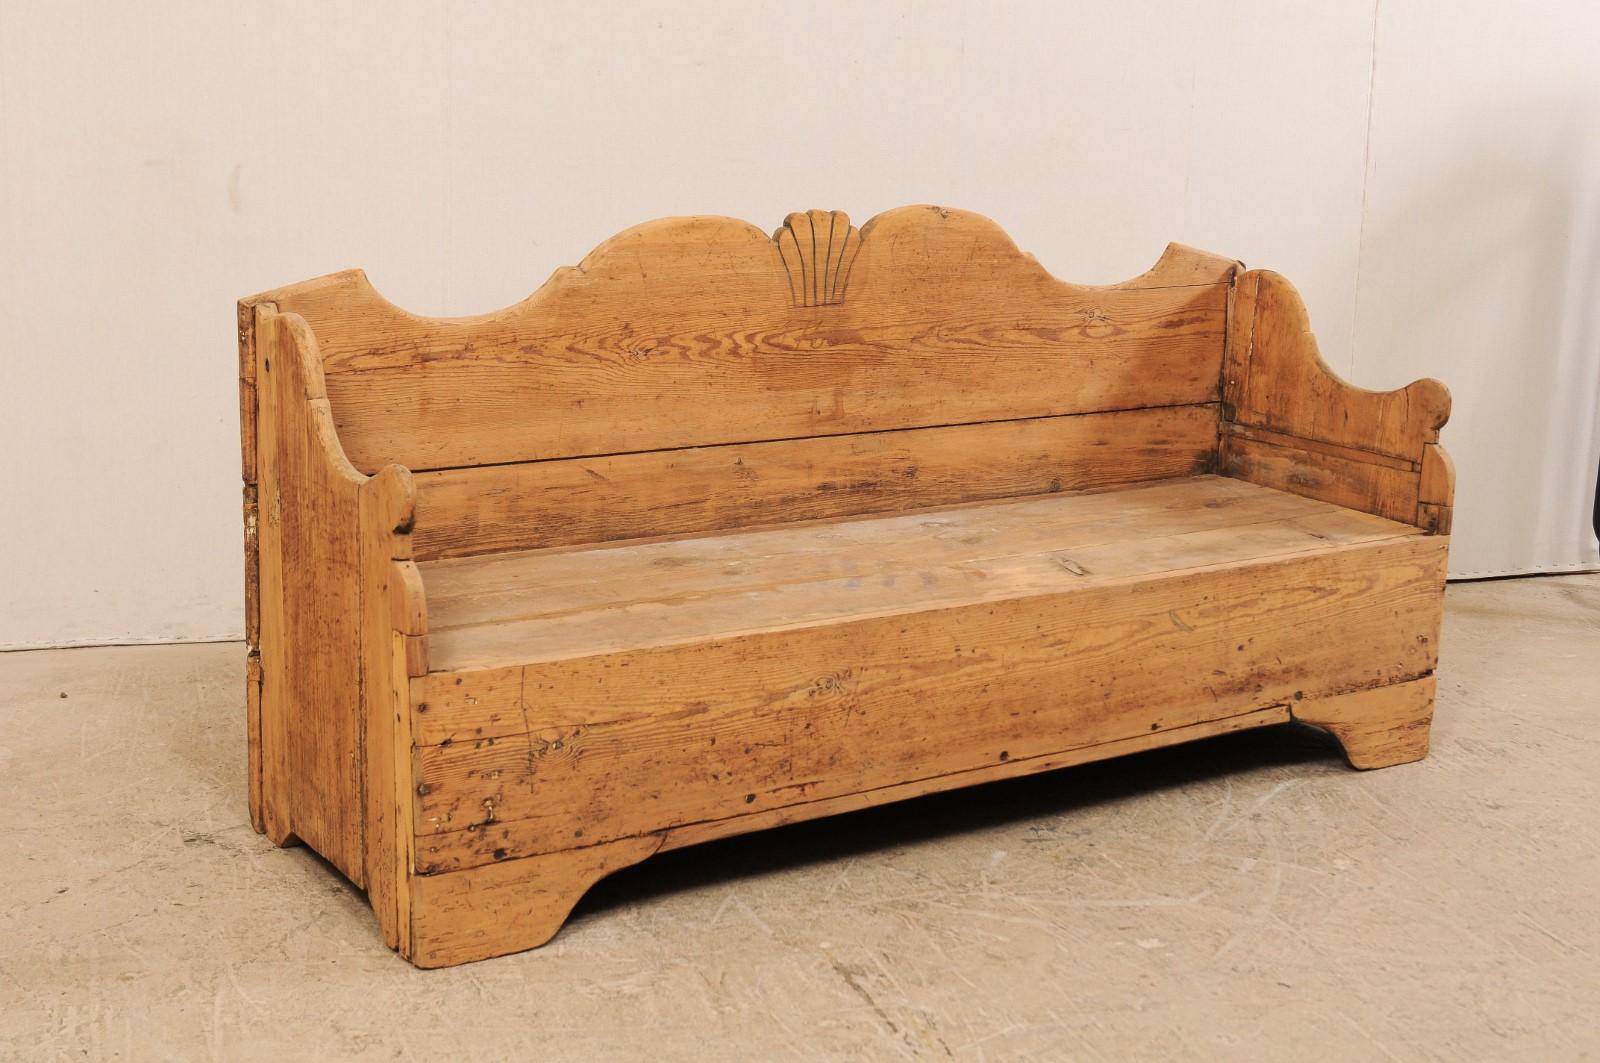 Swedish Period Gustavian Carved Wood Sofa Bench from the Early 19th Century 1